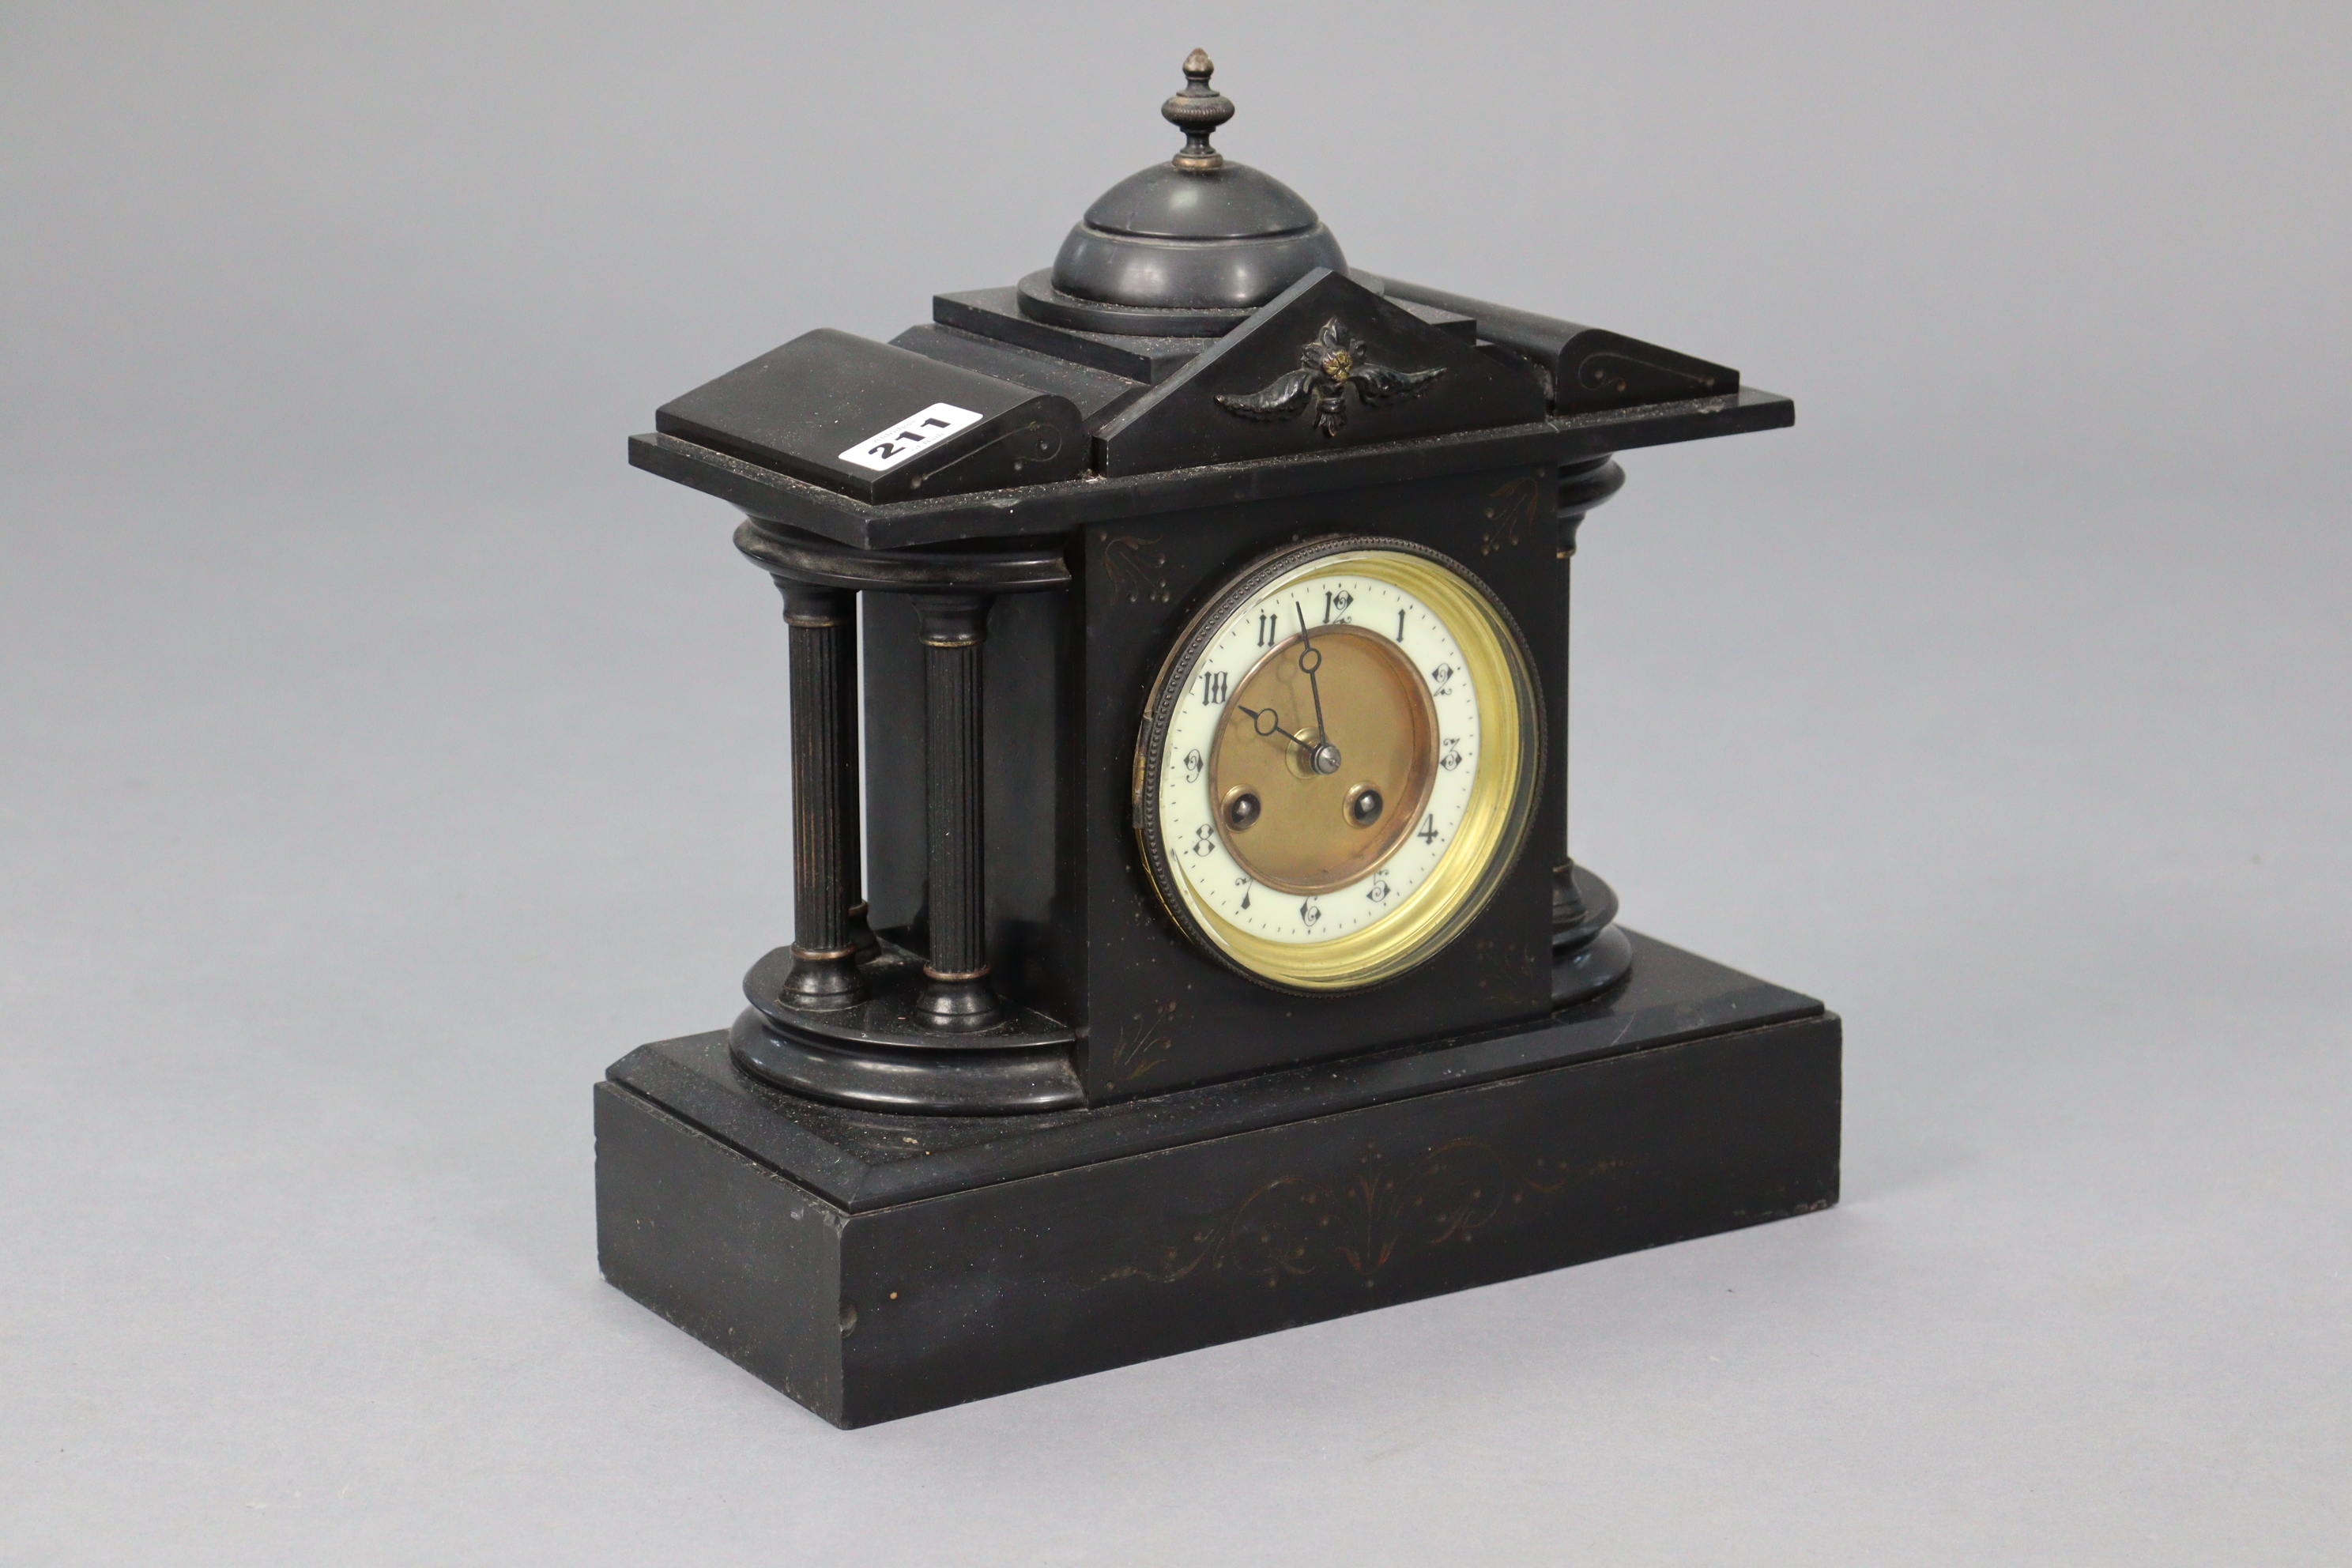 A late 19th/early 20th century mantel clock with two-part dial & in black slate architectural - Image 2 of 3